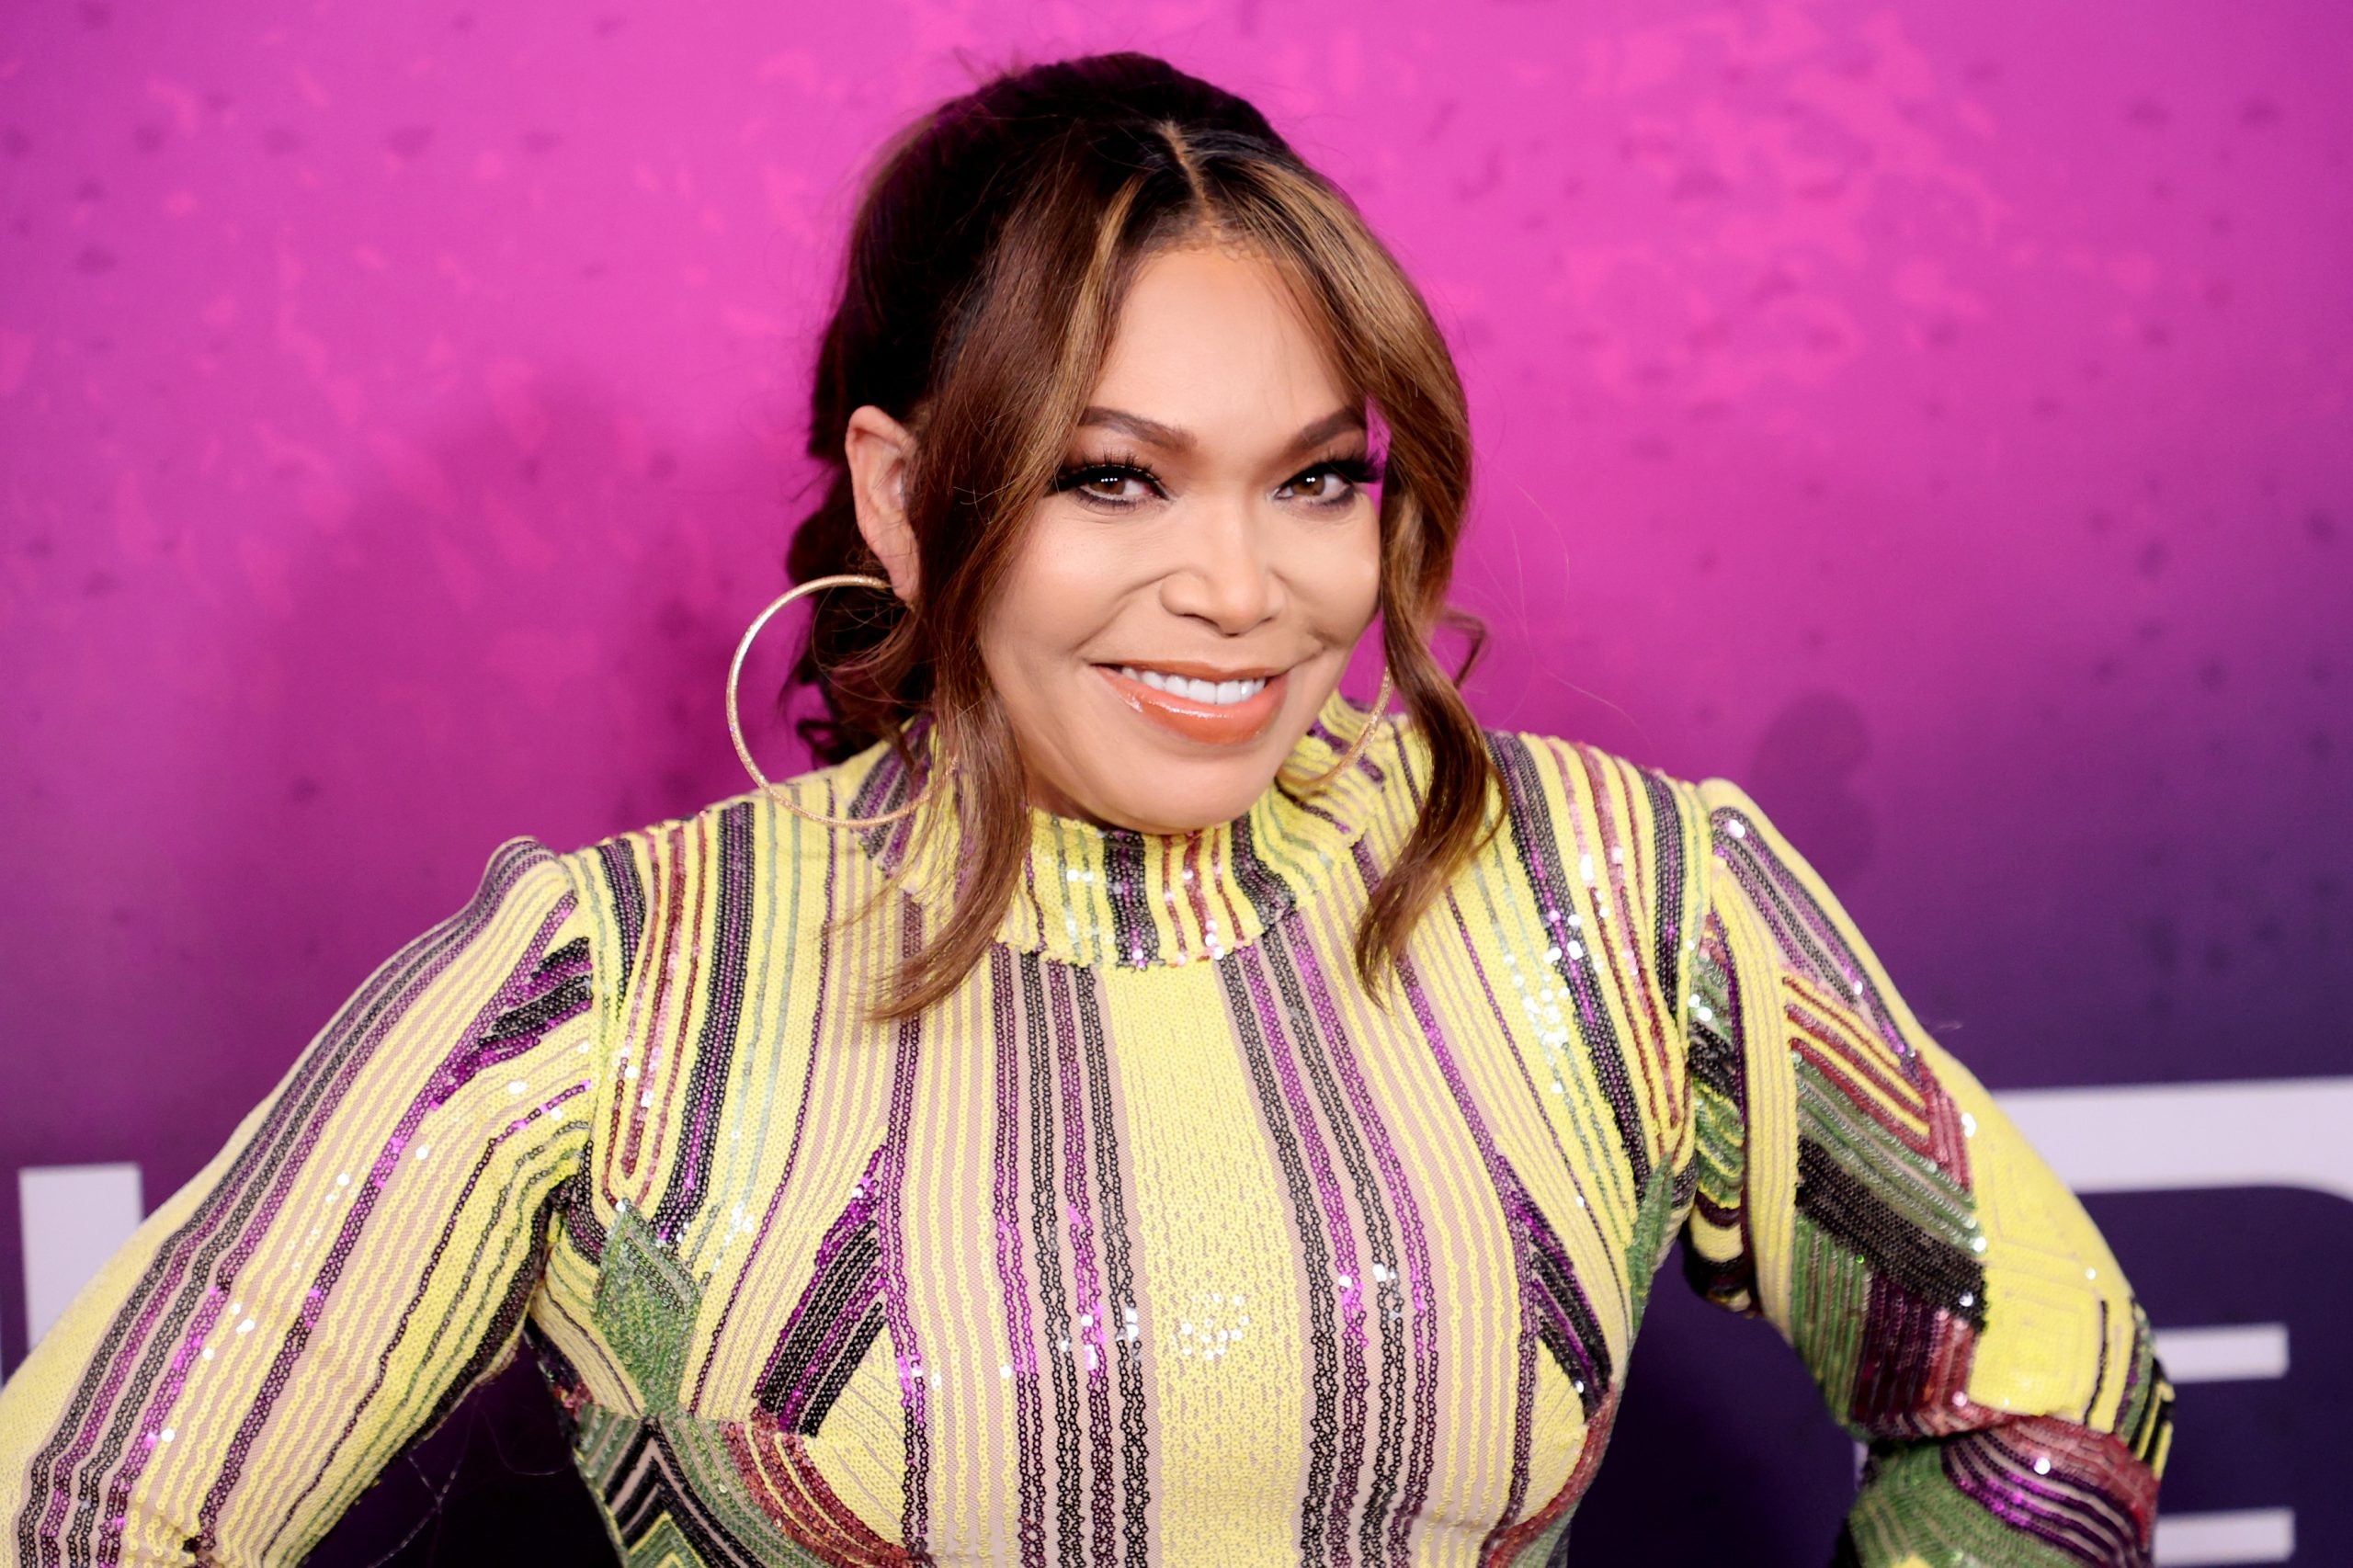 Tisha Campbell Speaks On Light Skinned Privilege And Spike Lee’s Social Experiments Around Colorism